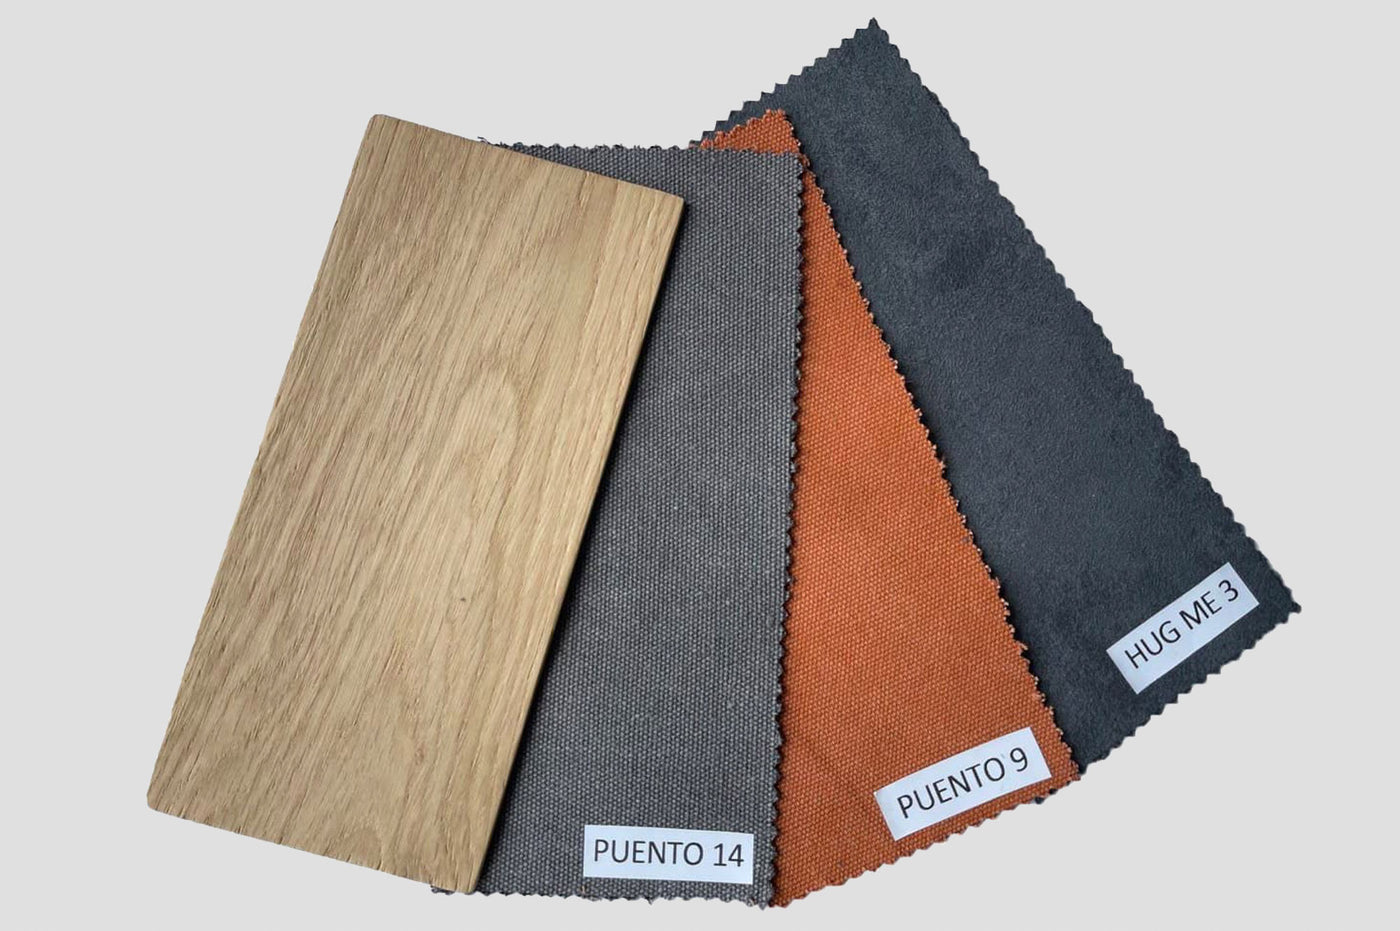 Wood and cloth samples